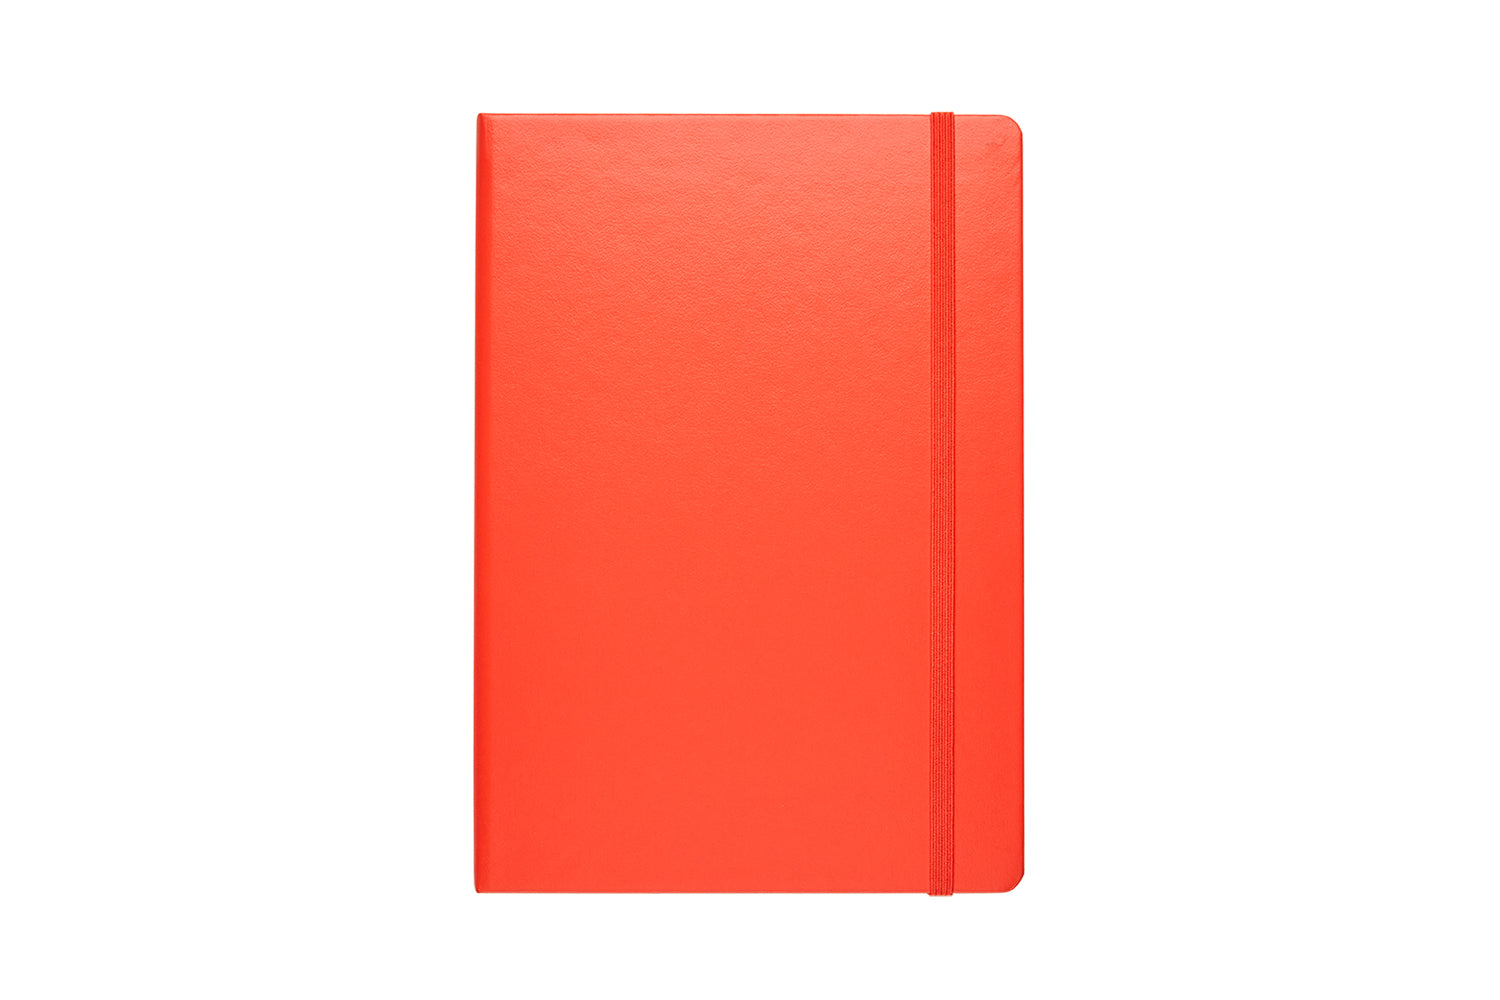 Leuchtturm1917 Classic Hardcover Notebook - All Colours, Sizes & Paper Types